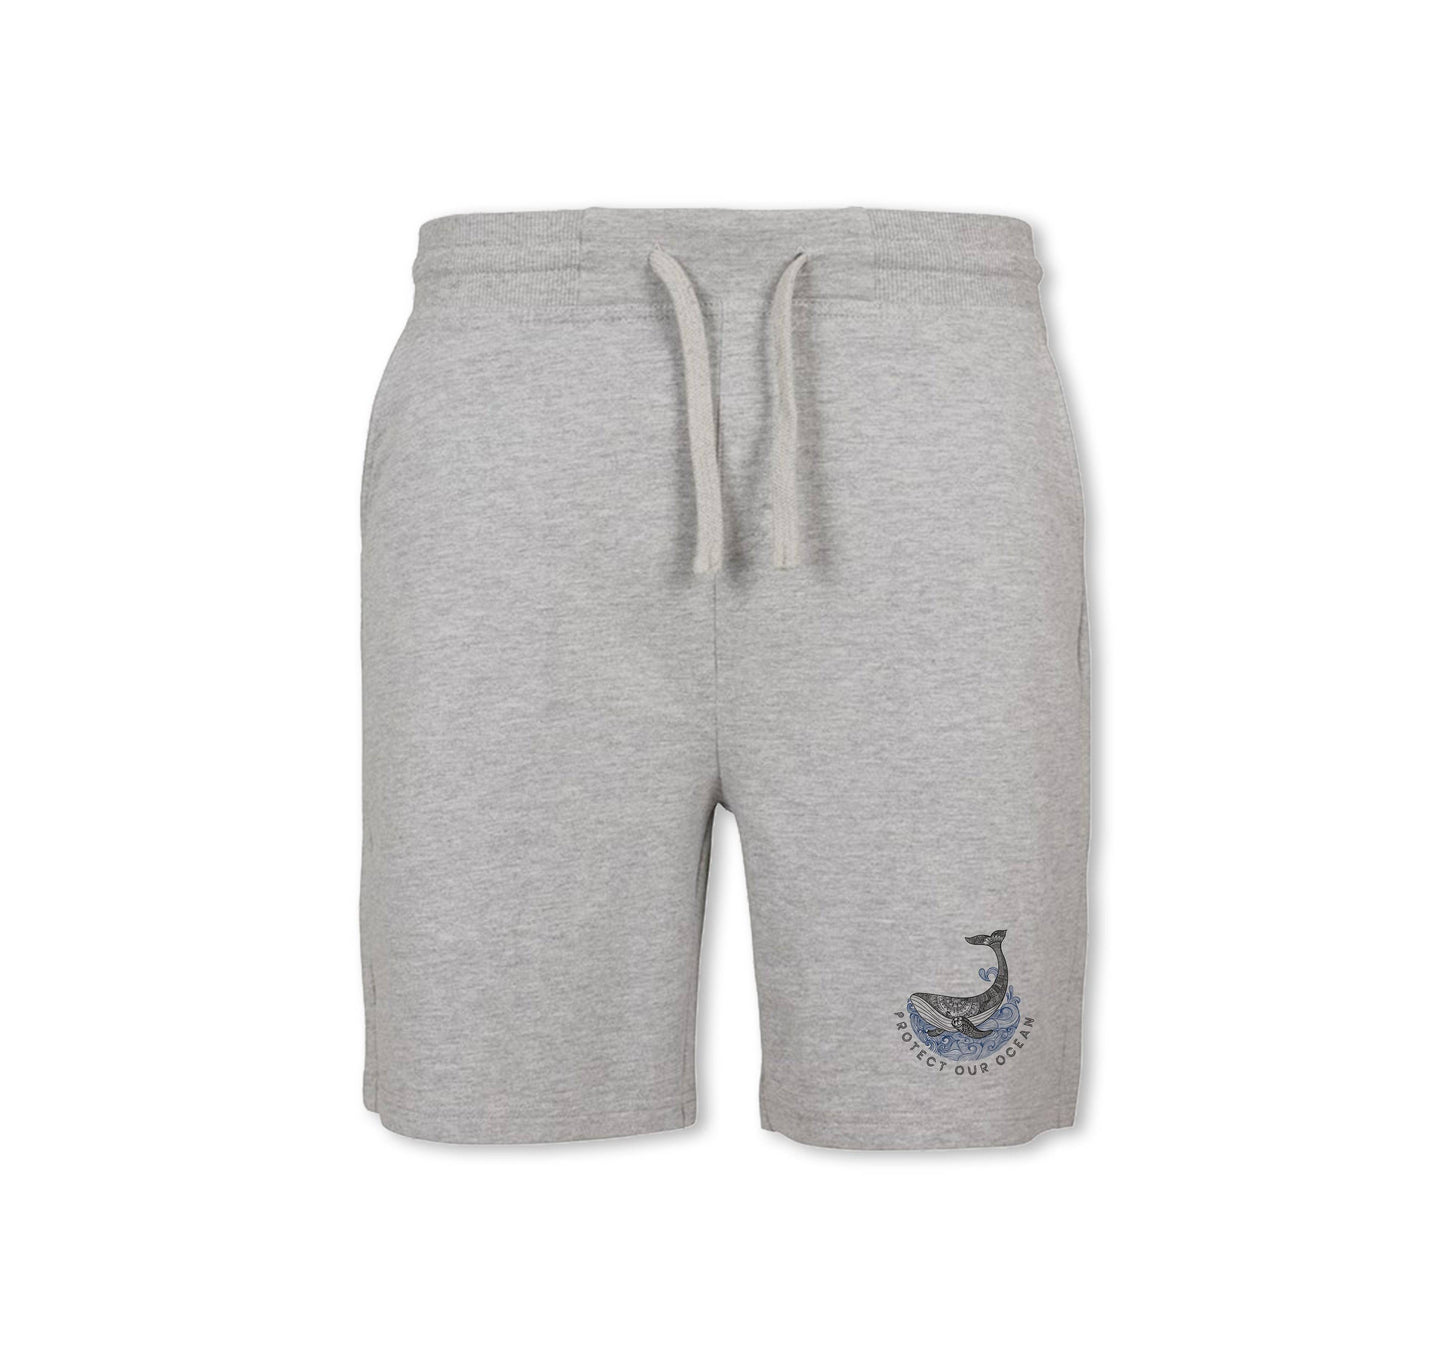 Protect Our Ocean Shorts - Organic Cotton - One Choice Apparel